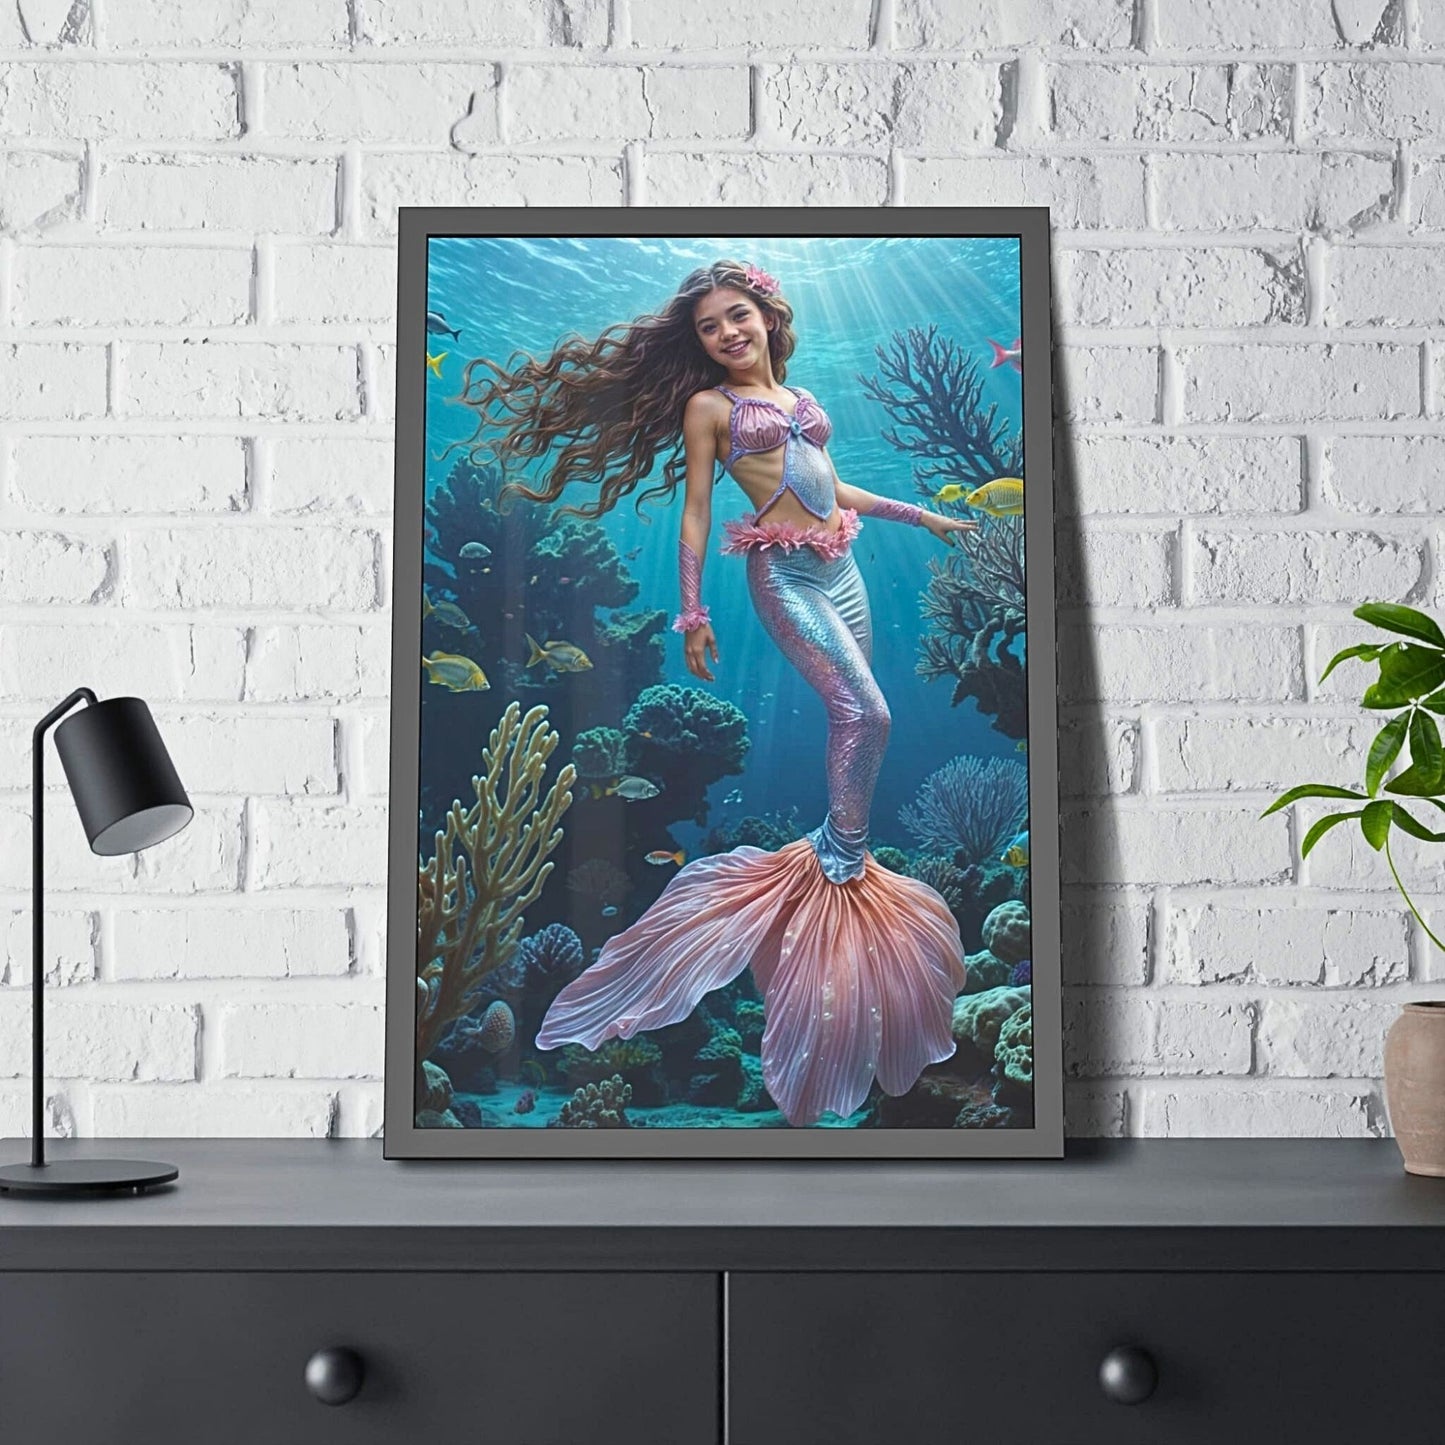 Surprise your daughter with a magical Custom Mermaid Portrait from Photo, perfect for her Birthday. Our Personalized Princess Mermaid Portraits make stunning Wall Art and unique gifts for daughters, sisters, moms, or girlfriends. Turn any photo into a cherished keepsake with our Custom Mermaid Art portraits, ideal for celebrating special moments and creating lasting memories.